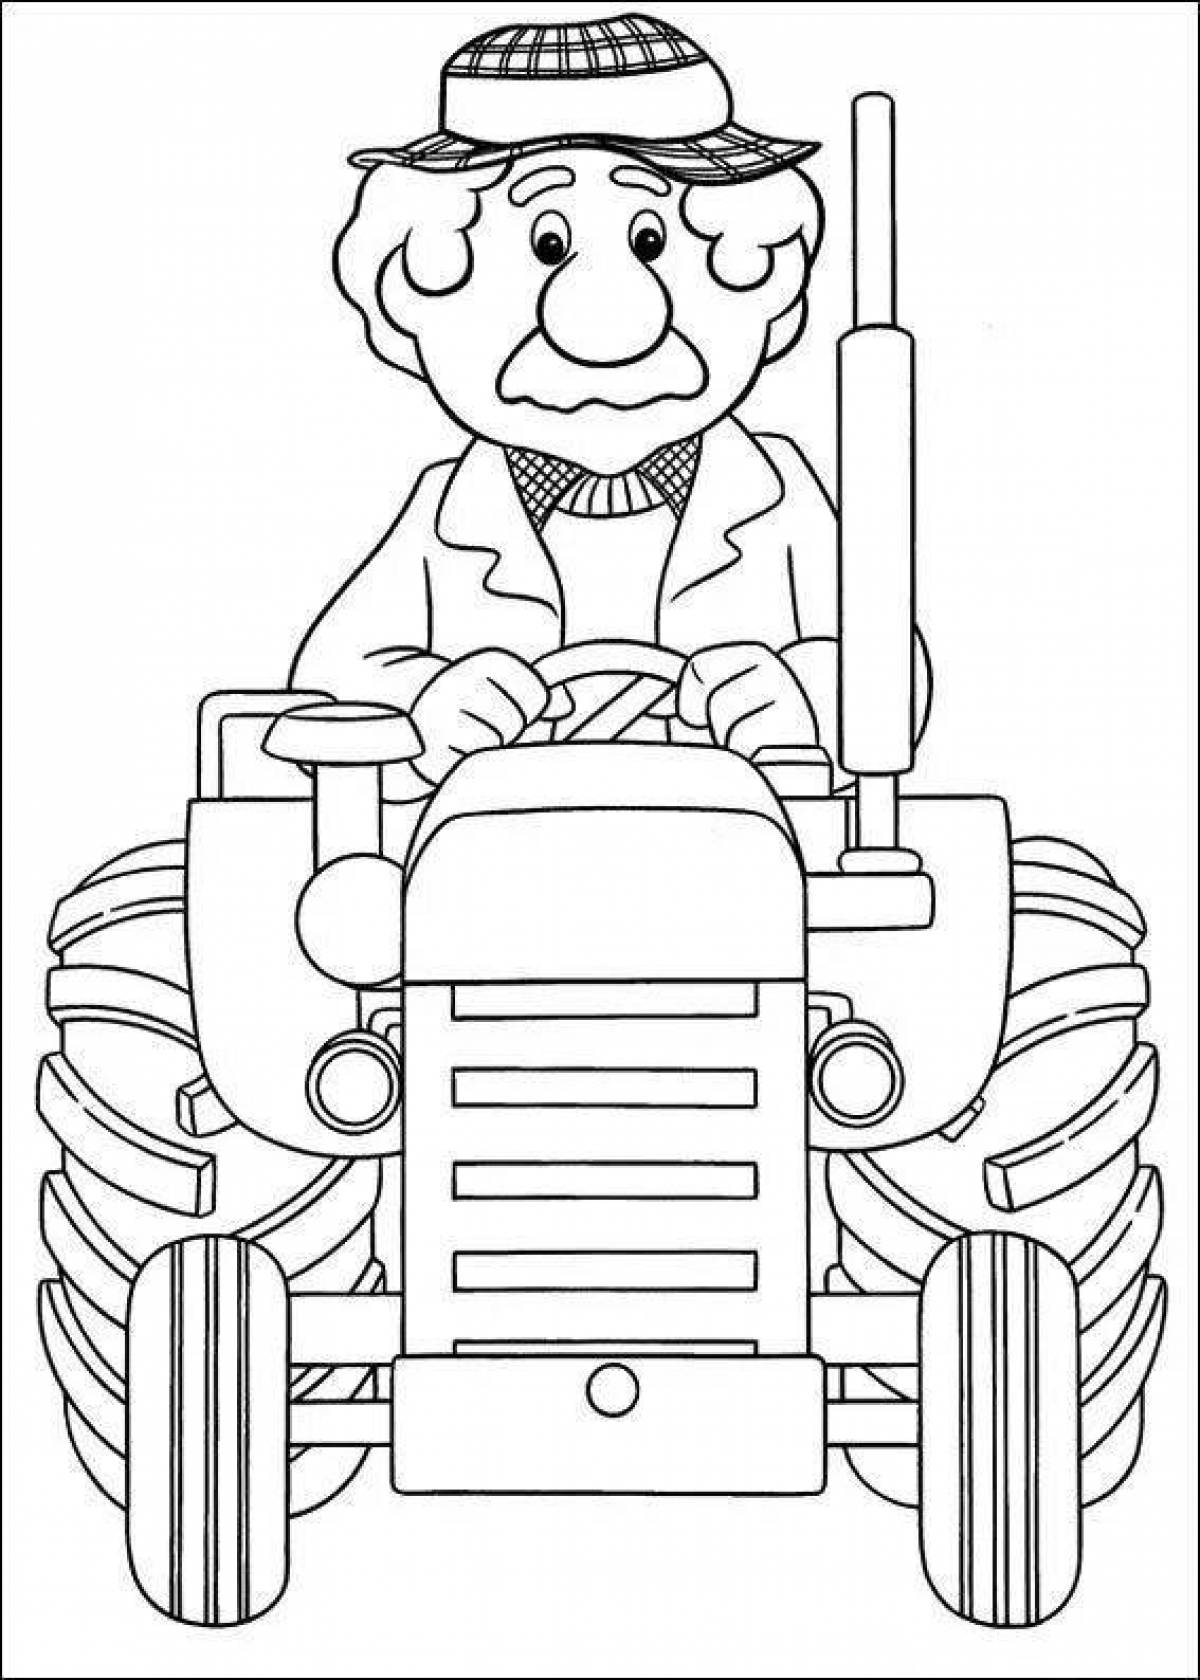 Funny transport profession coloring book for children 5-6 years old